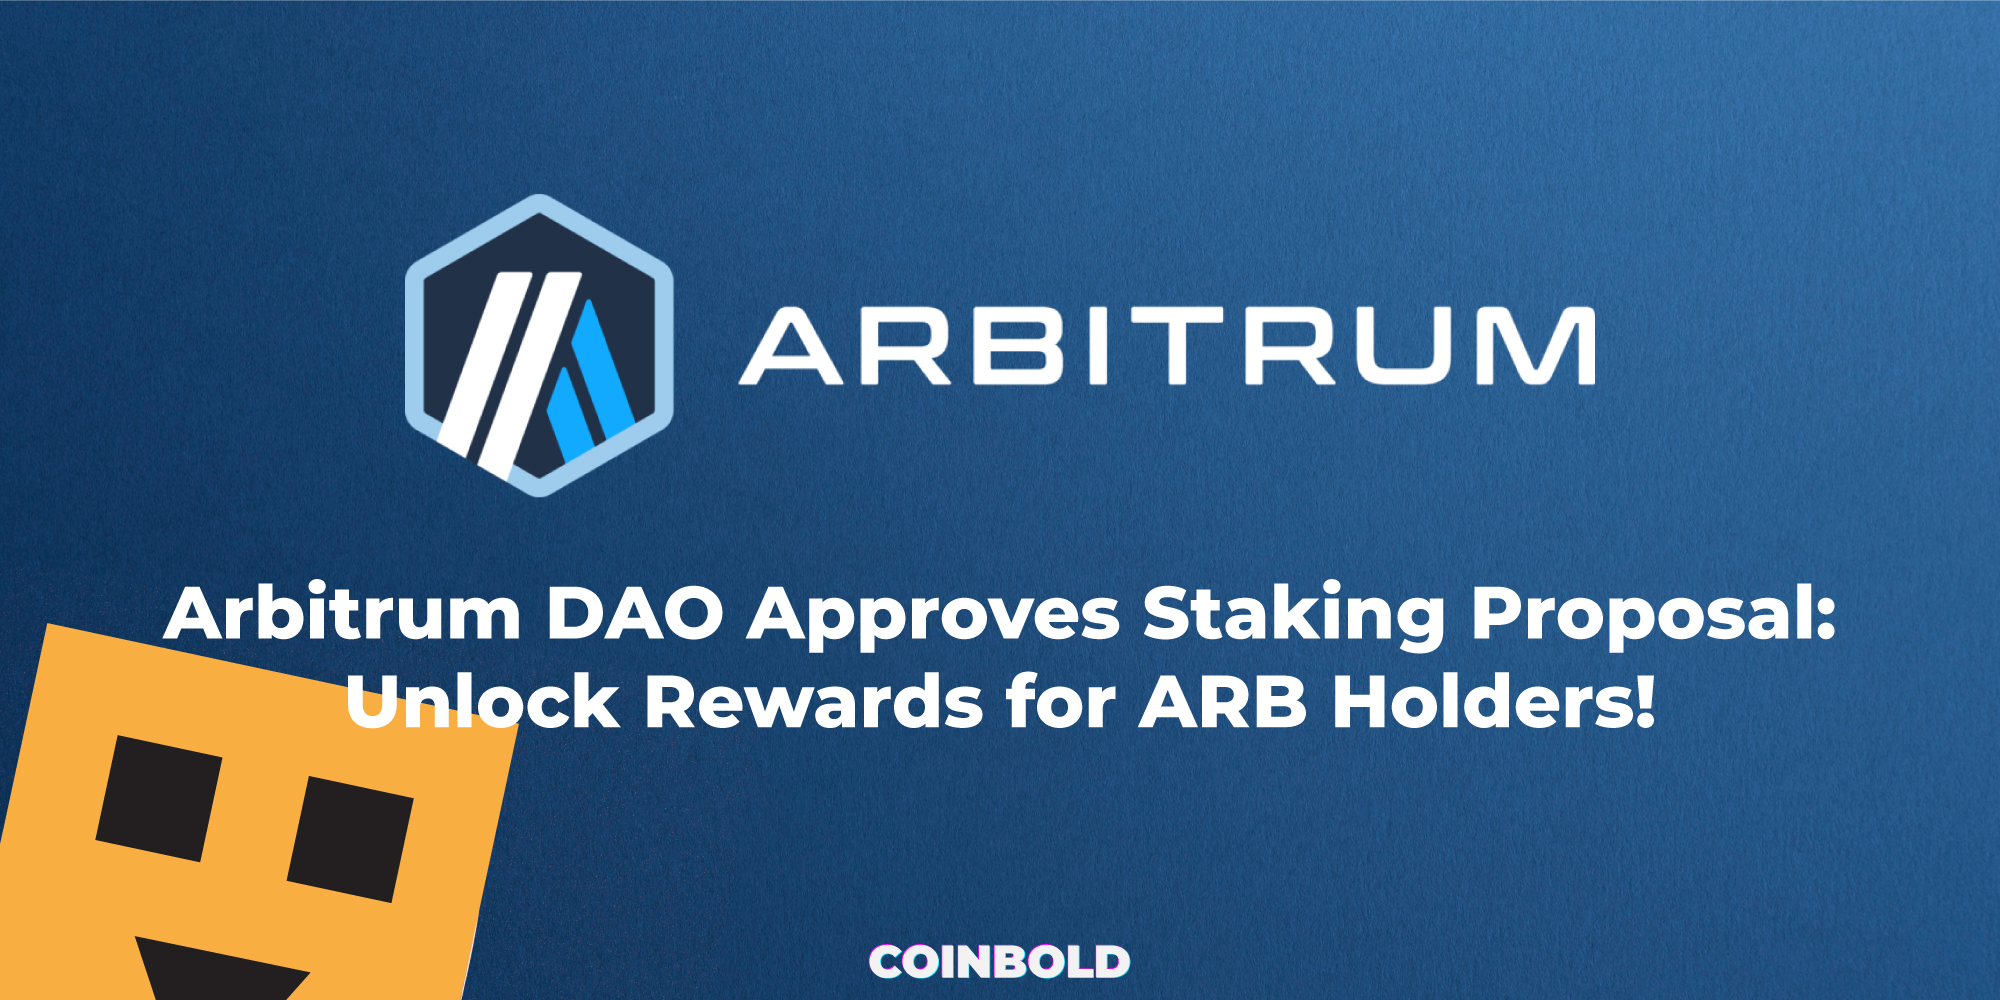 Arbitrum DAO Approves Staking Proposal Unlock Rewards for ARB Holders!